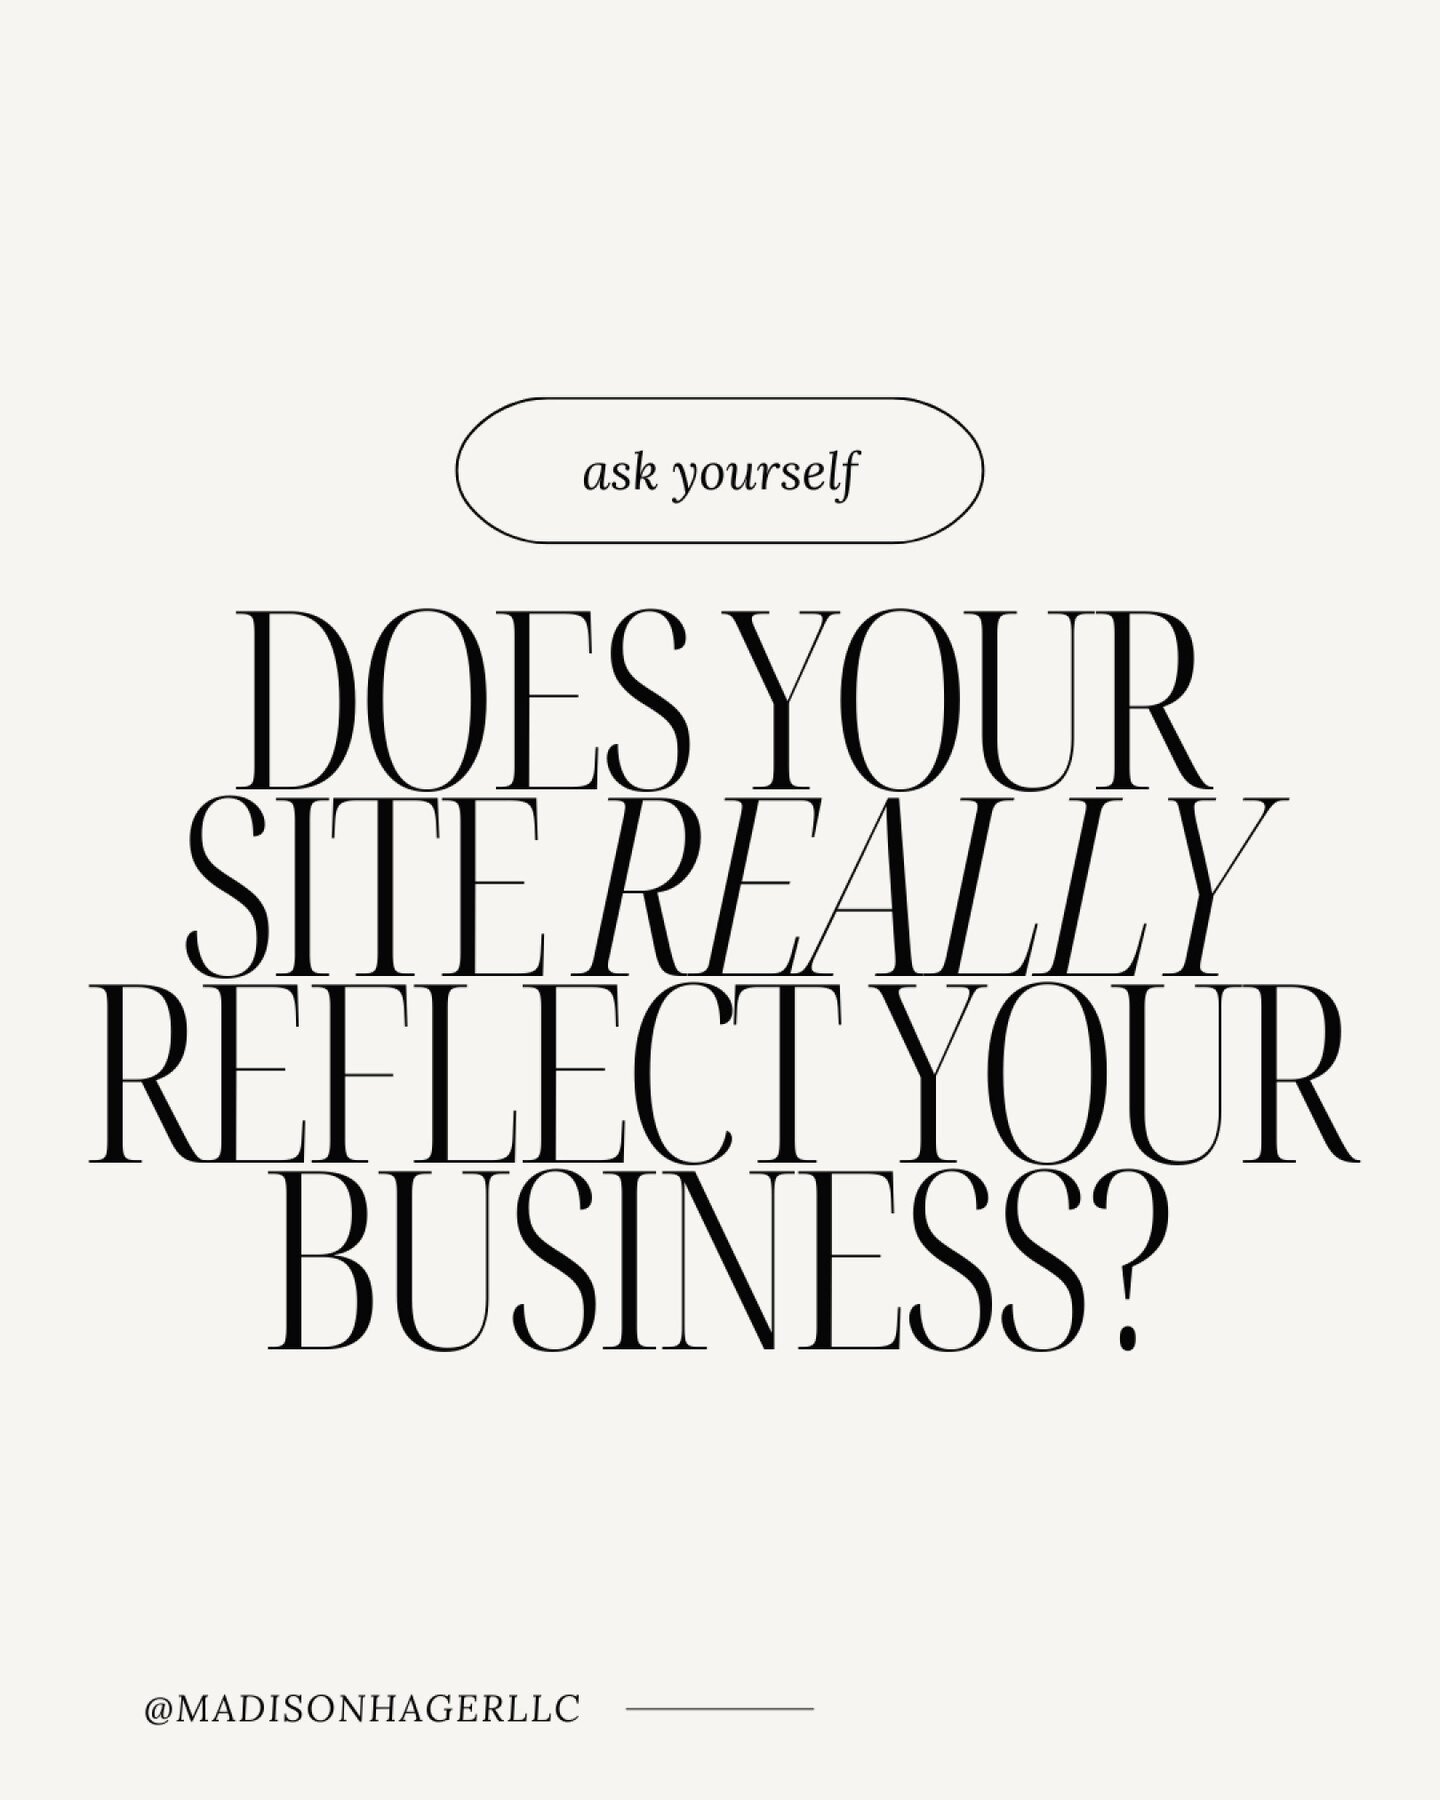 Or... is it lacking pizzazz? 🚫✨

You want your website to stand out
Be different from your competitors
Reel your ideal customer/client in

But how?

All you need is to give your site some TLC! ❤️&zwj;🩹

Every website should have personality, someth